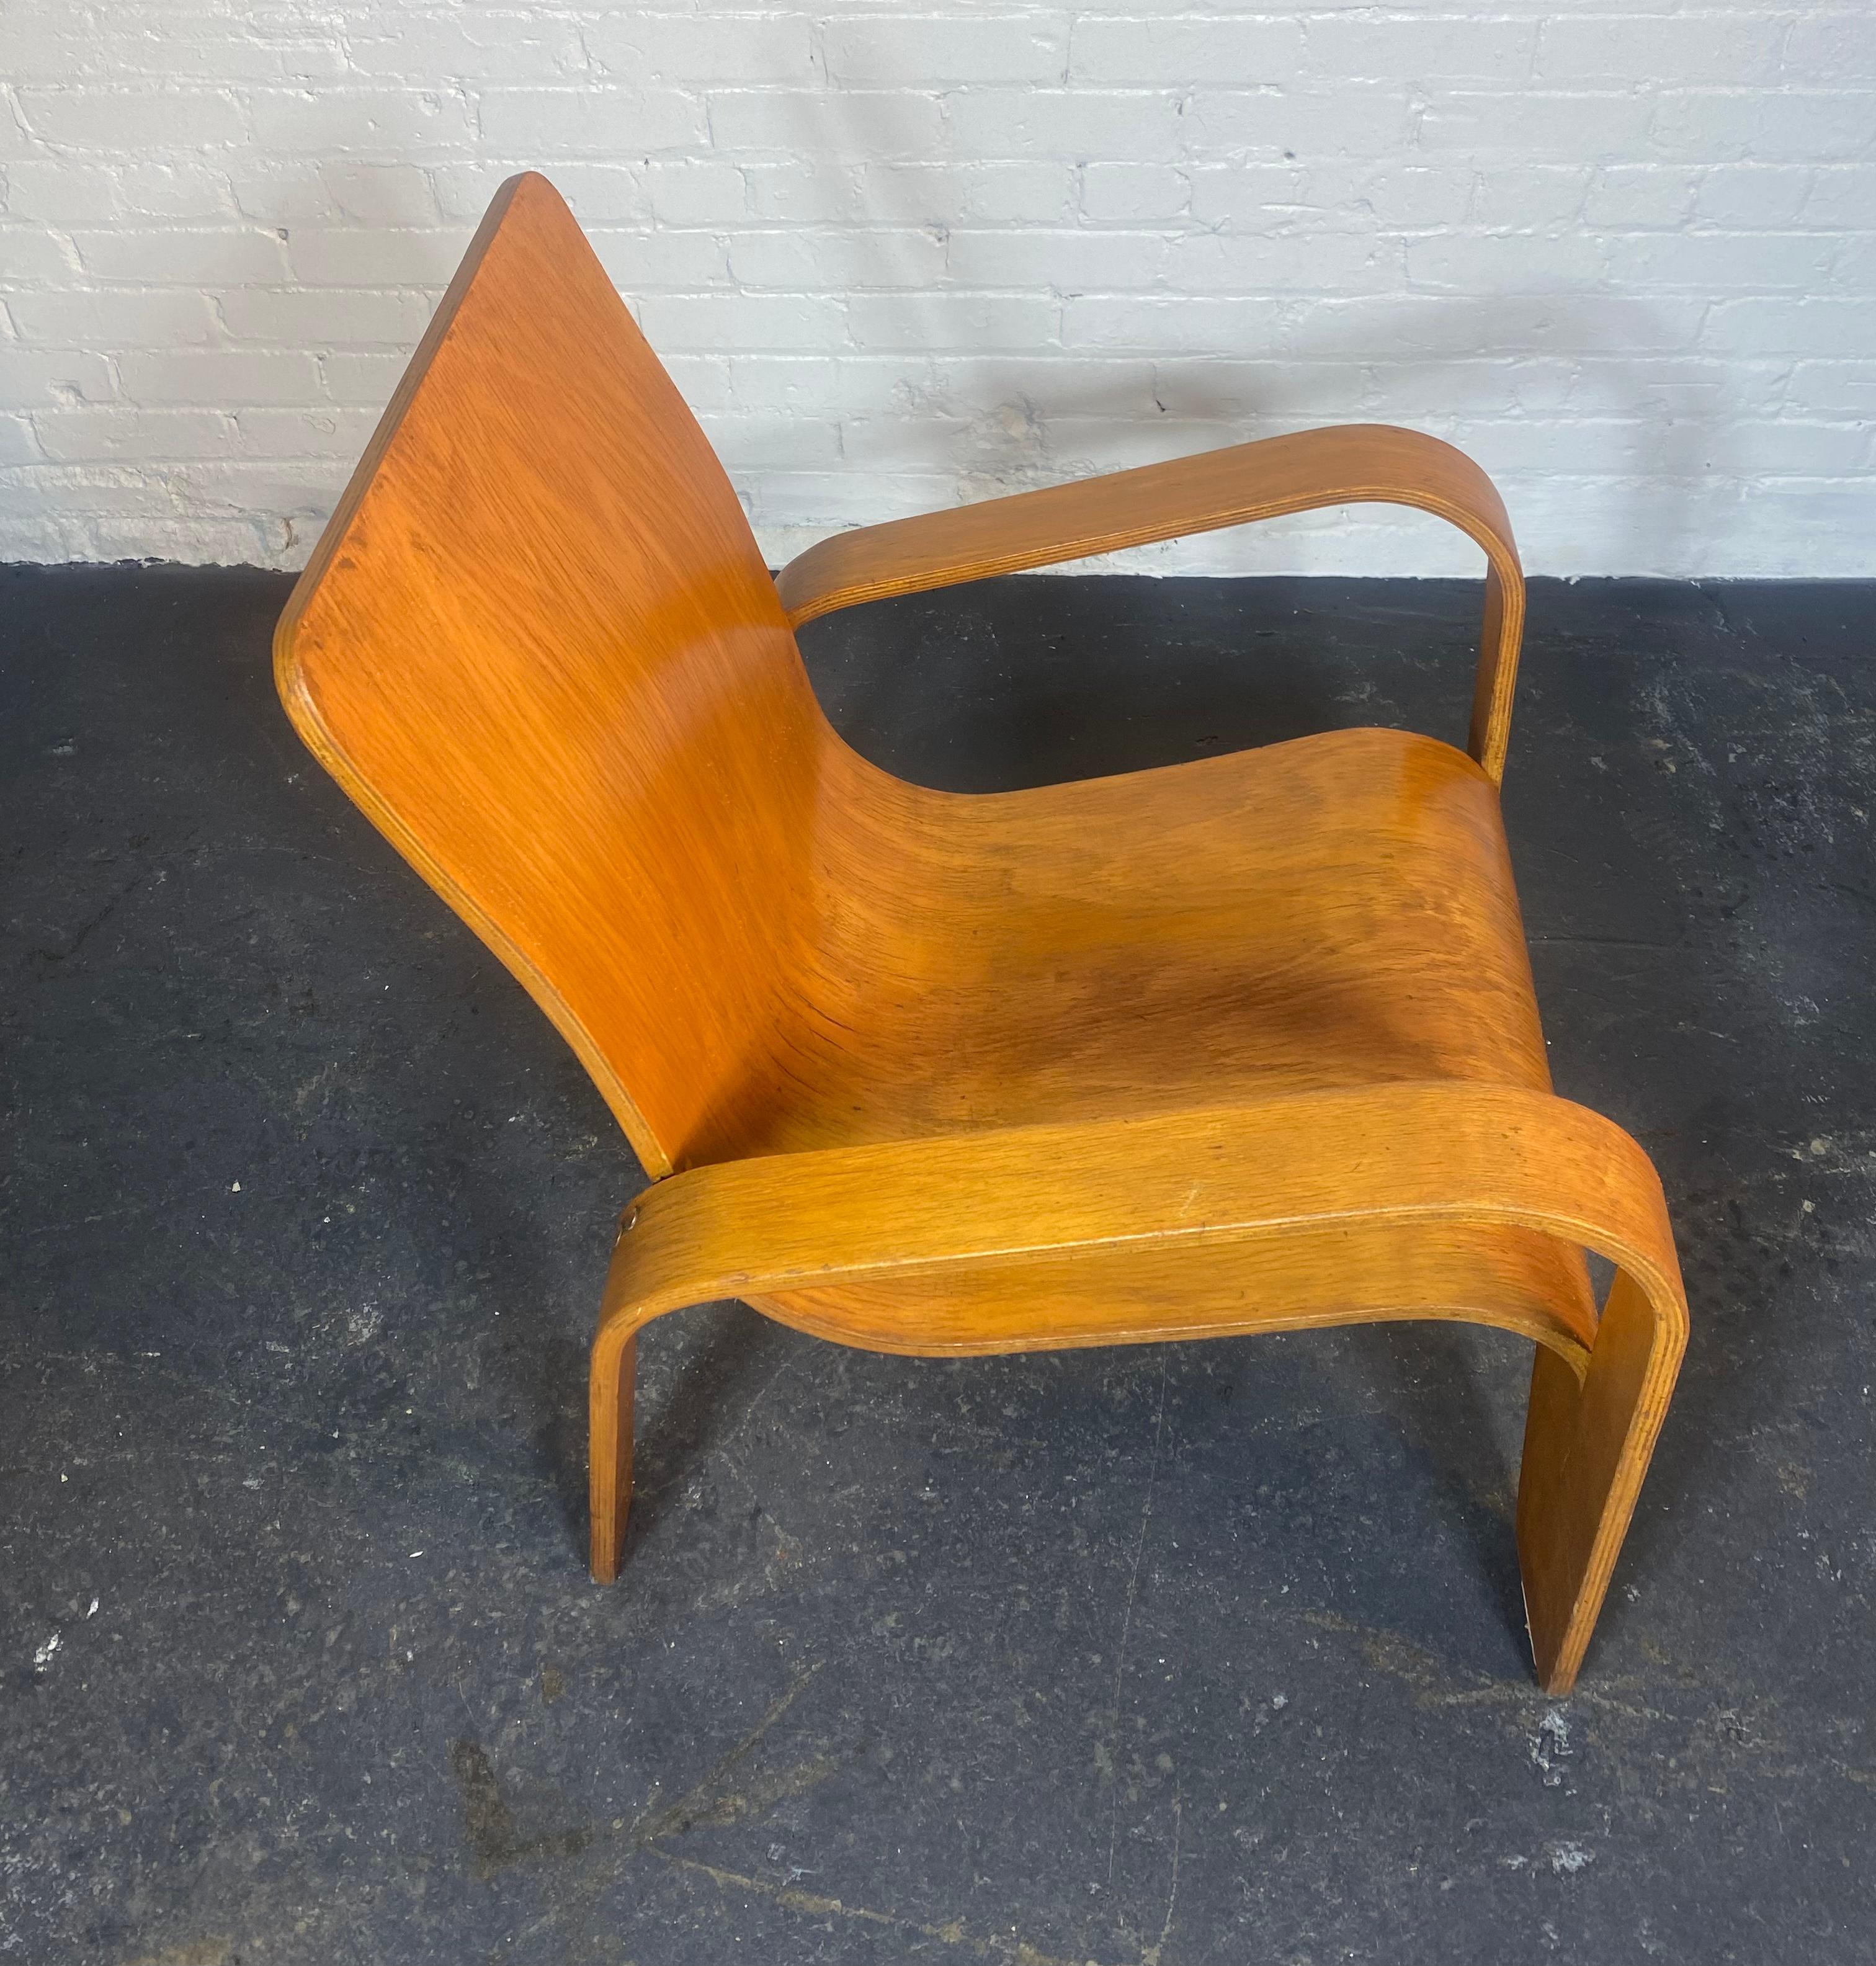 Mid-20th Century LaWo1 Molded Plywood Lounge Chair by Han Pieck for Lawo Ommen/ Netherlands 1945 For Sale